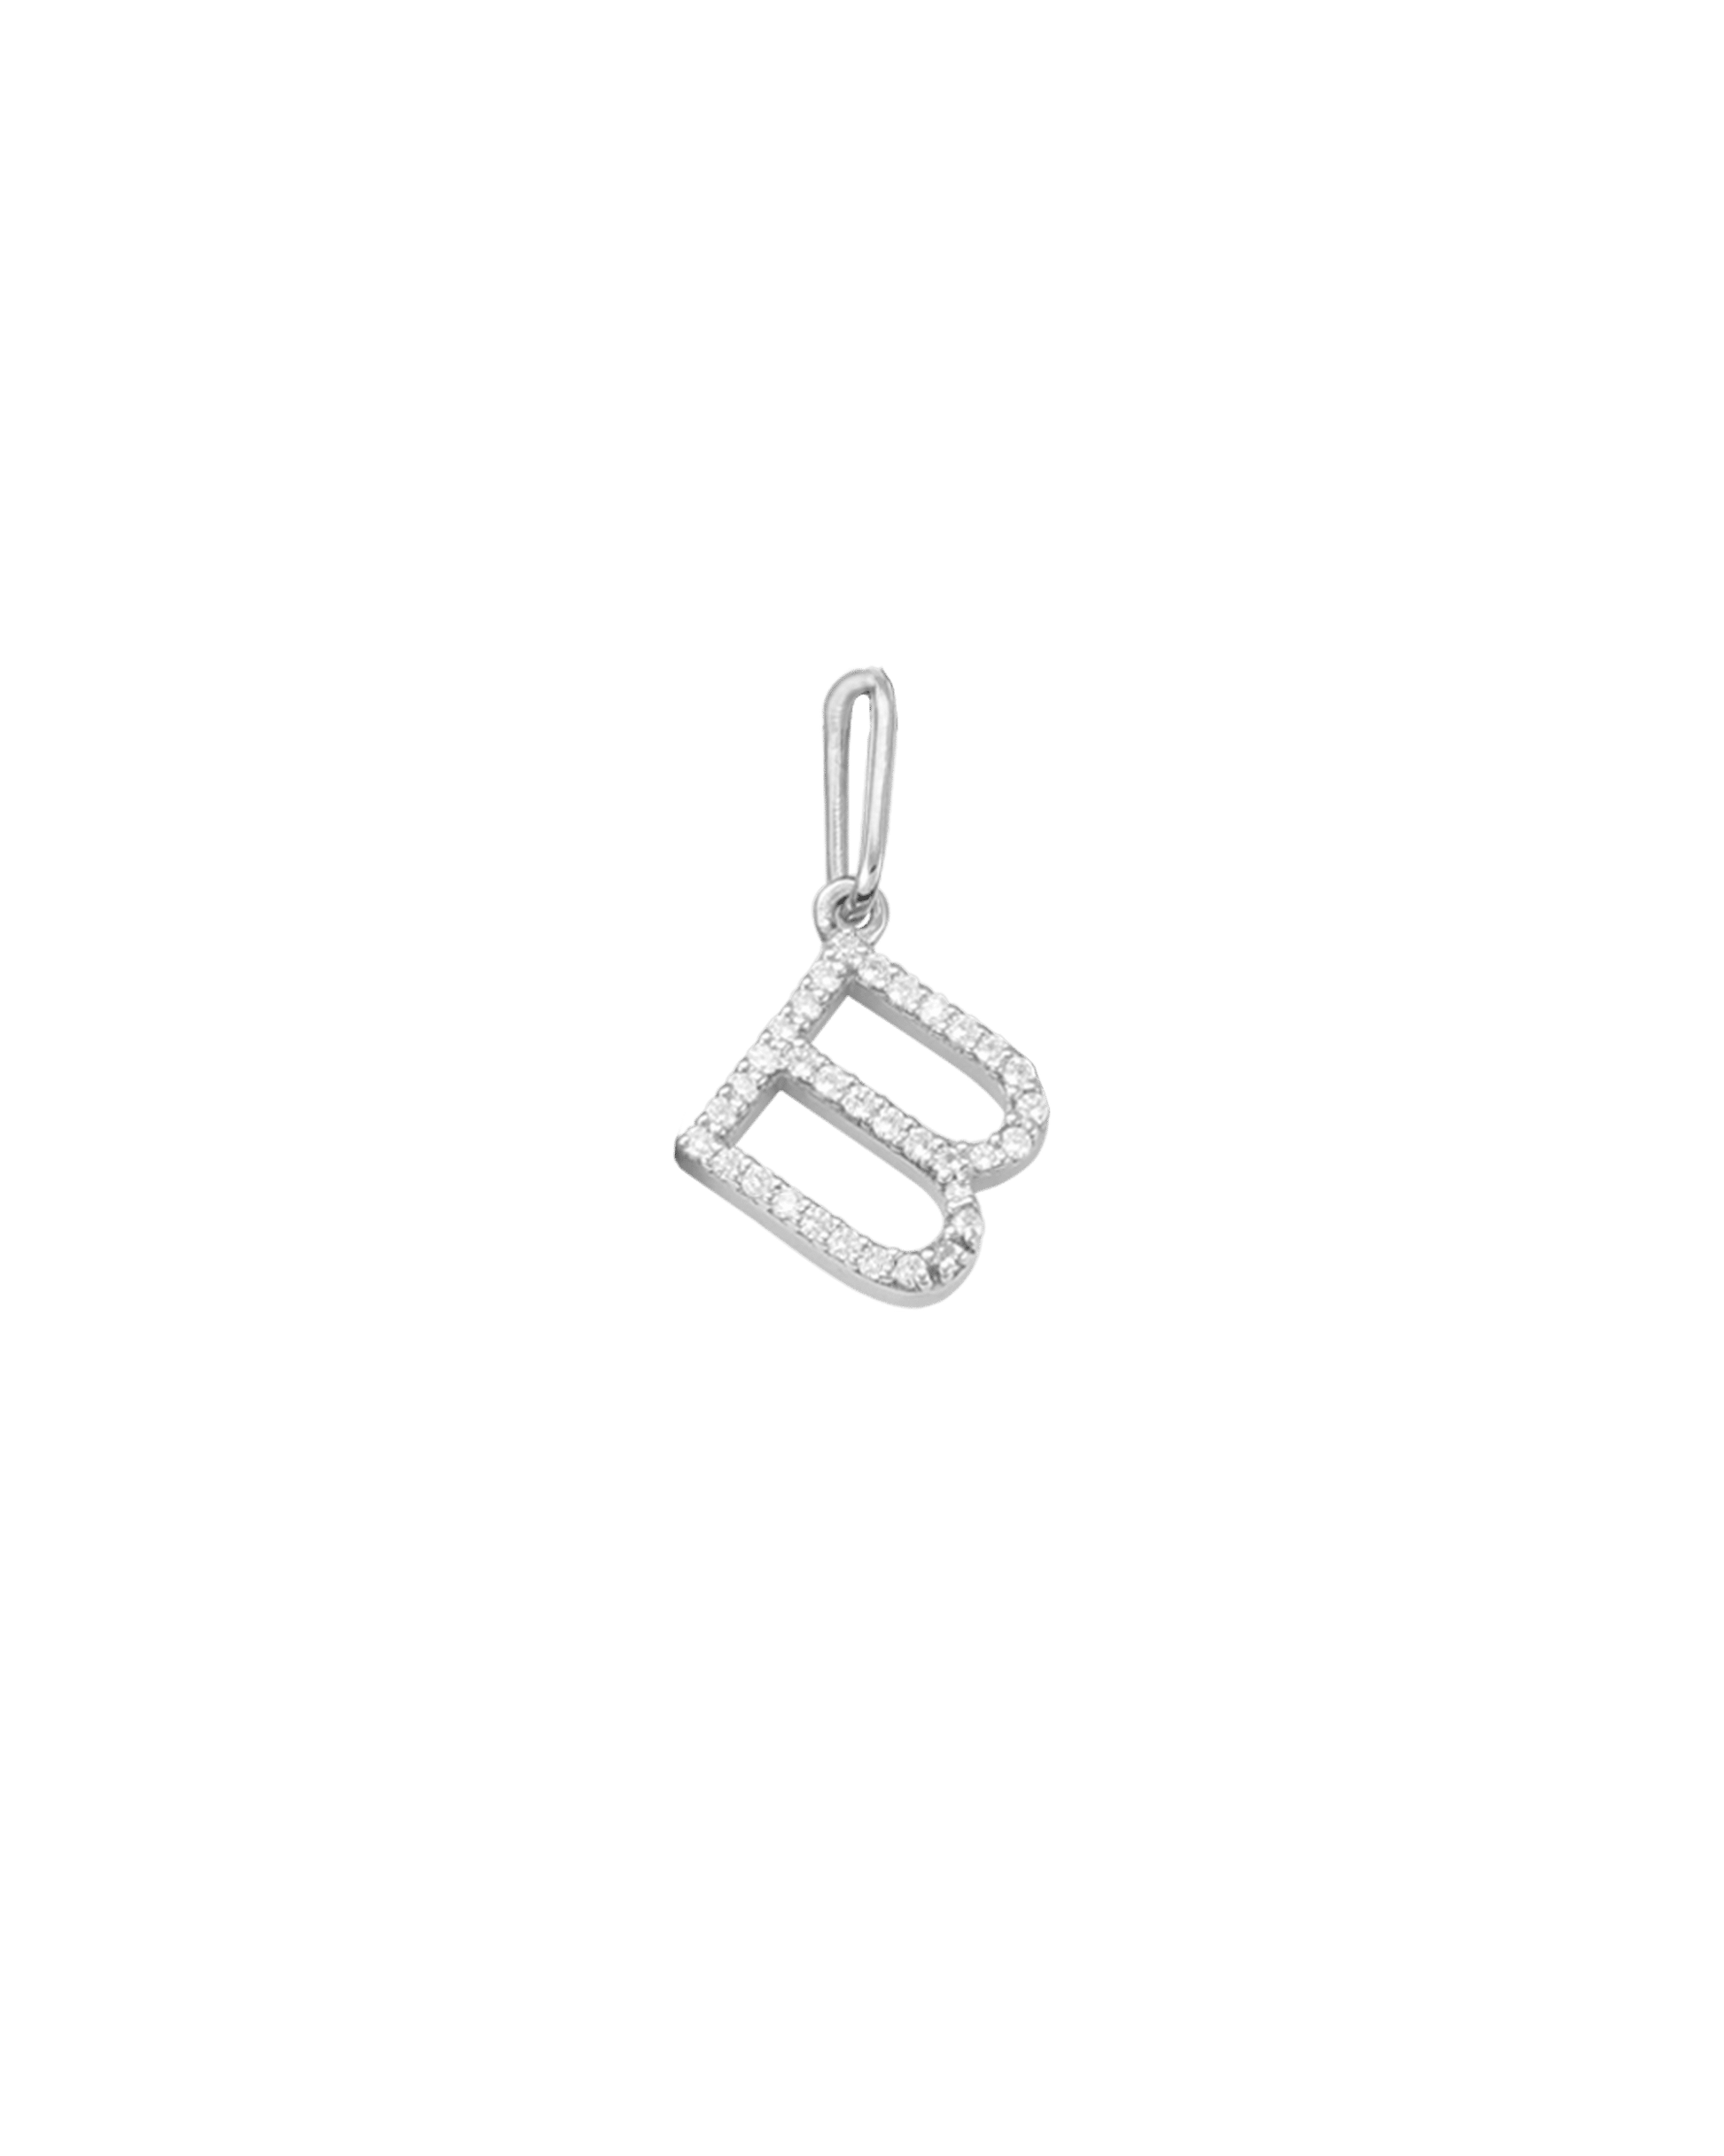 Frosted Charm - 14K White Gold Charm magal-dev 